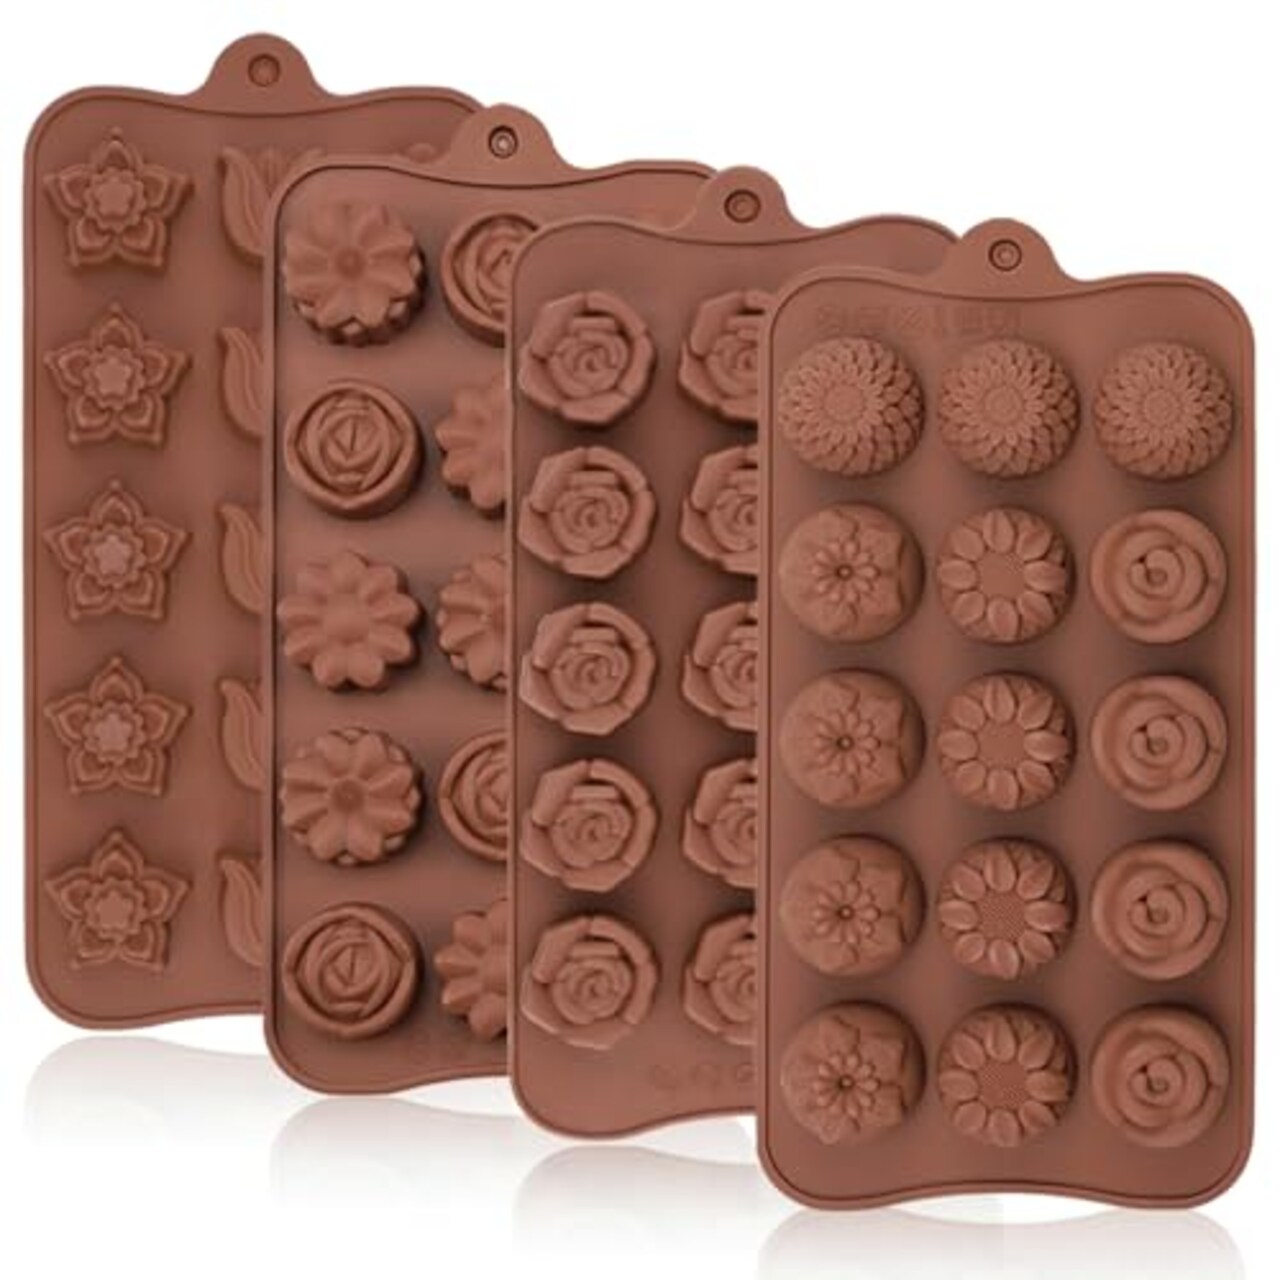 JOERSH Silicone Chocolate Molds for Fat Bombs Snacks & Truffles